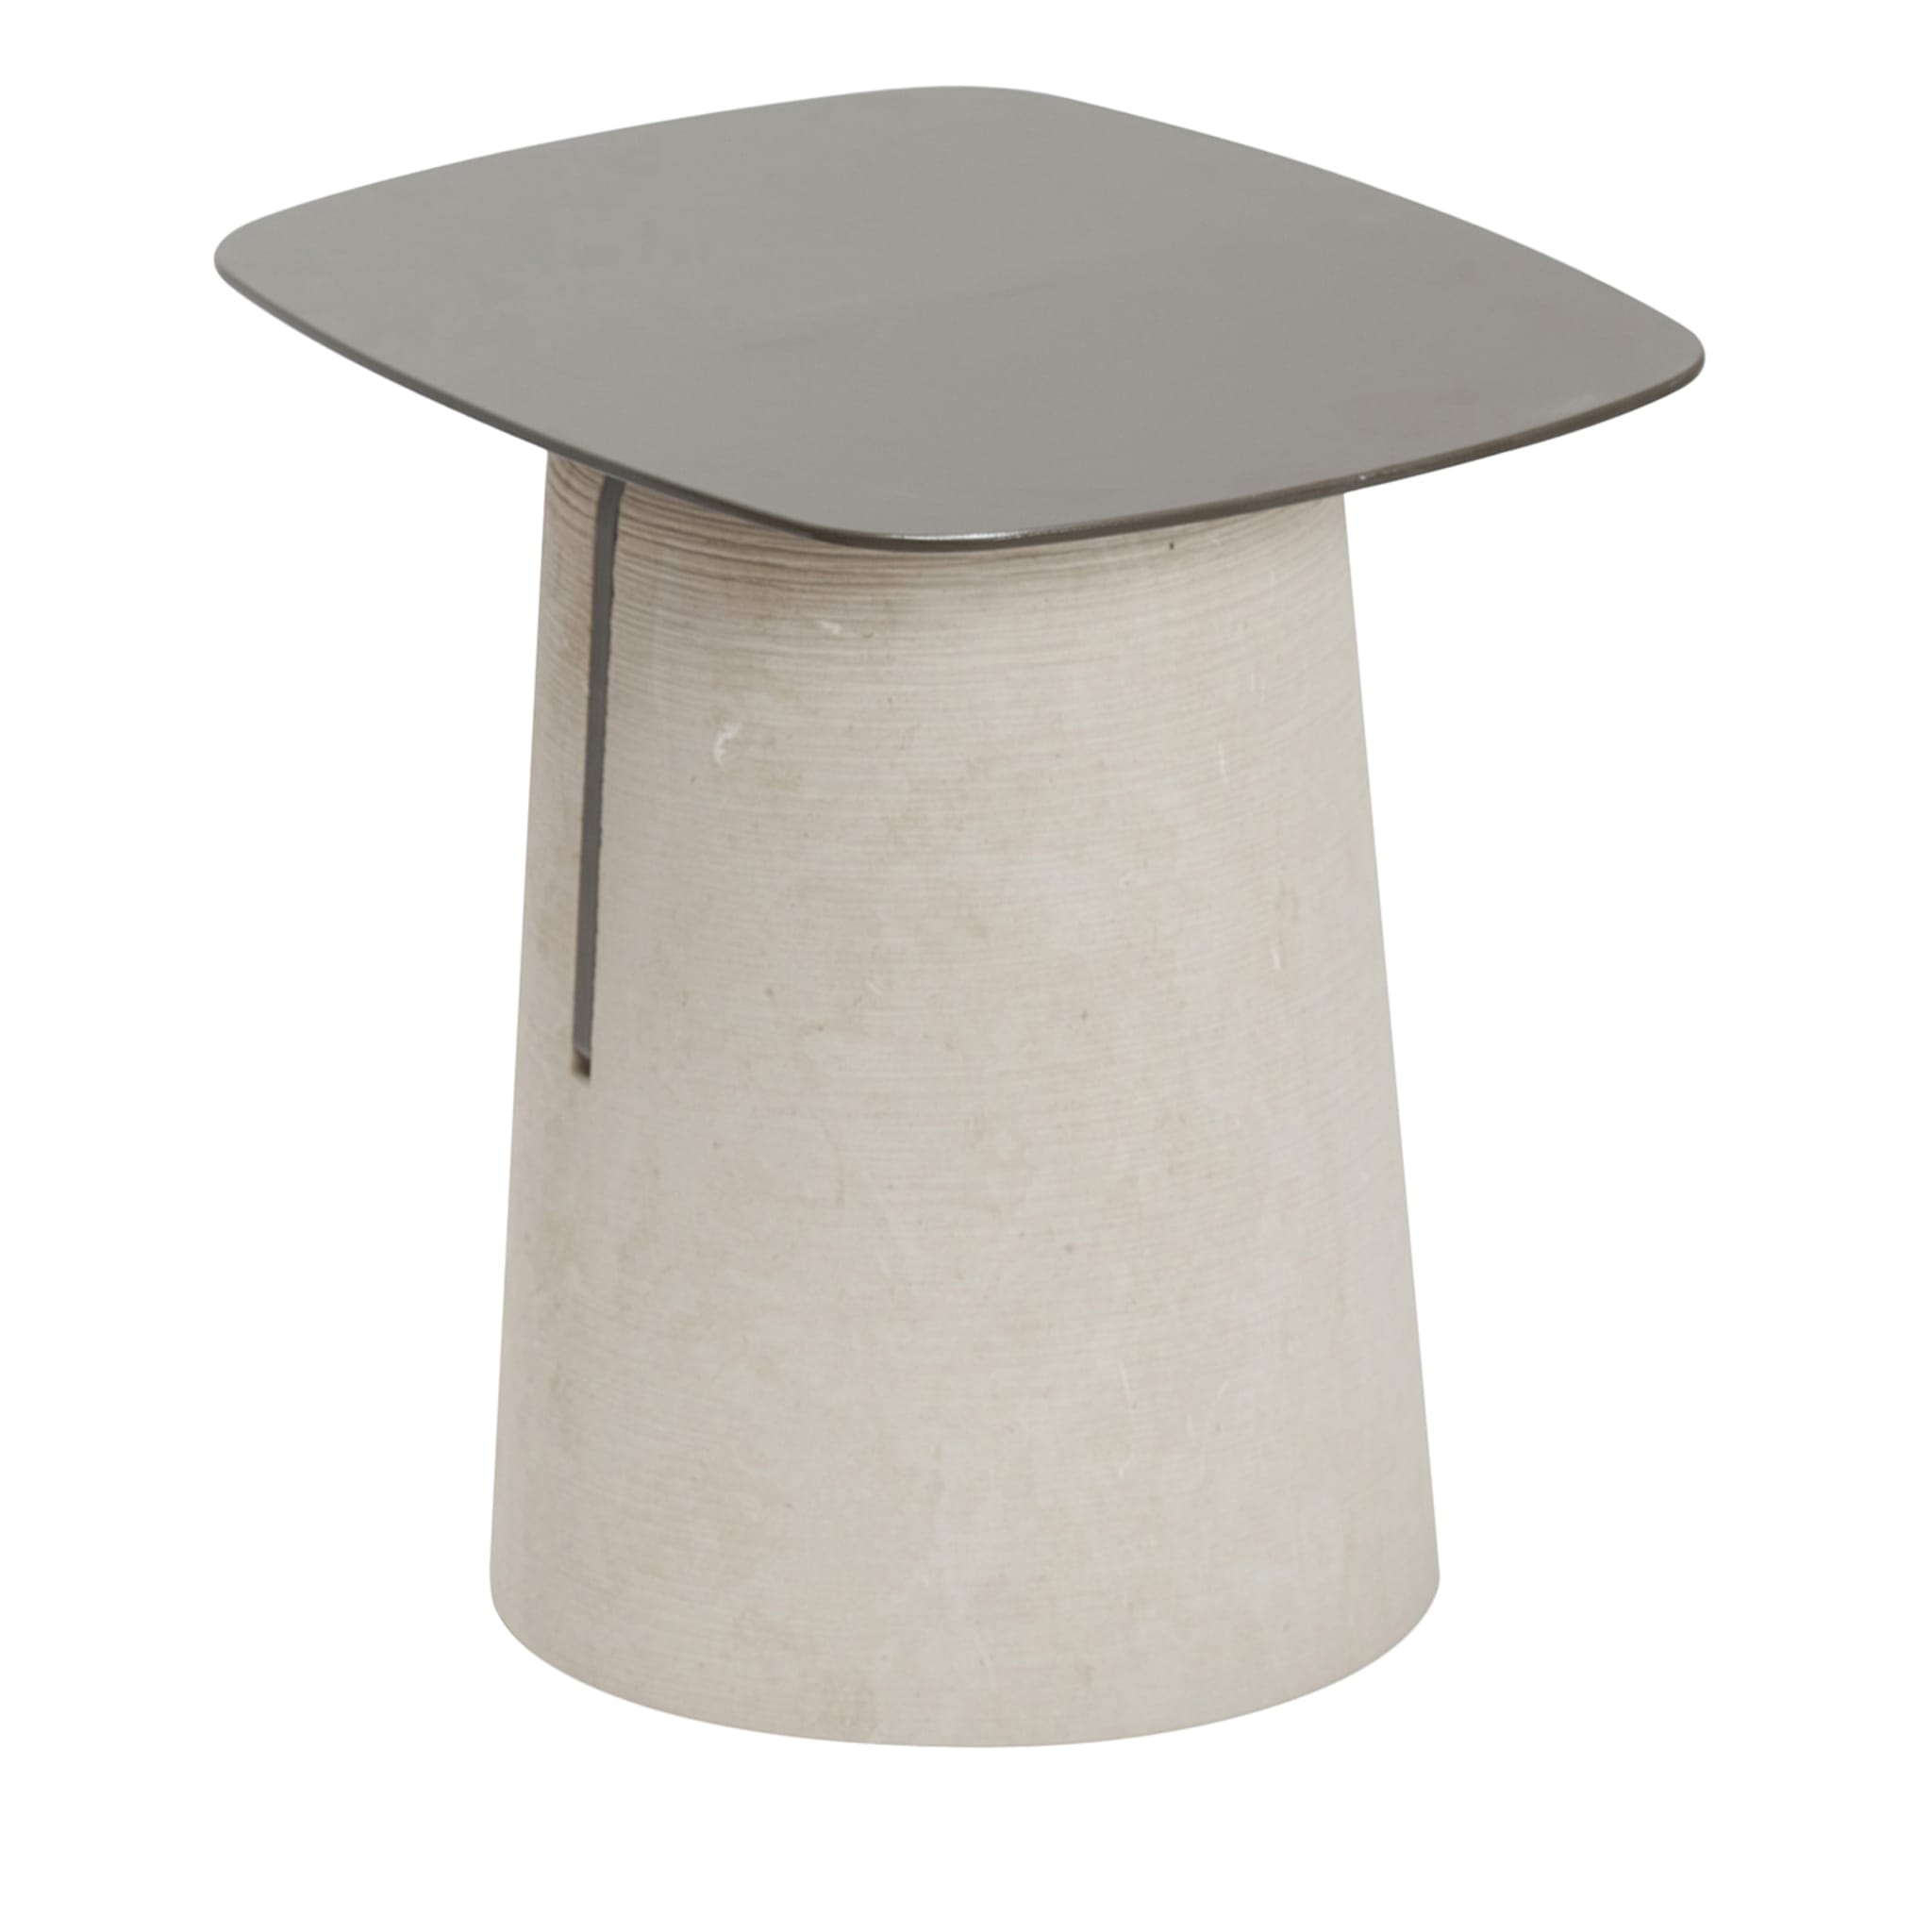 Piro Side Table by Lucidi & Pevere - Main view